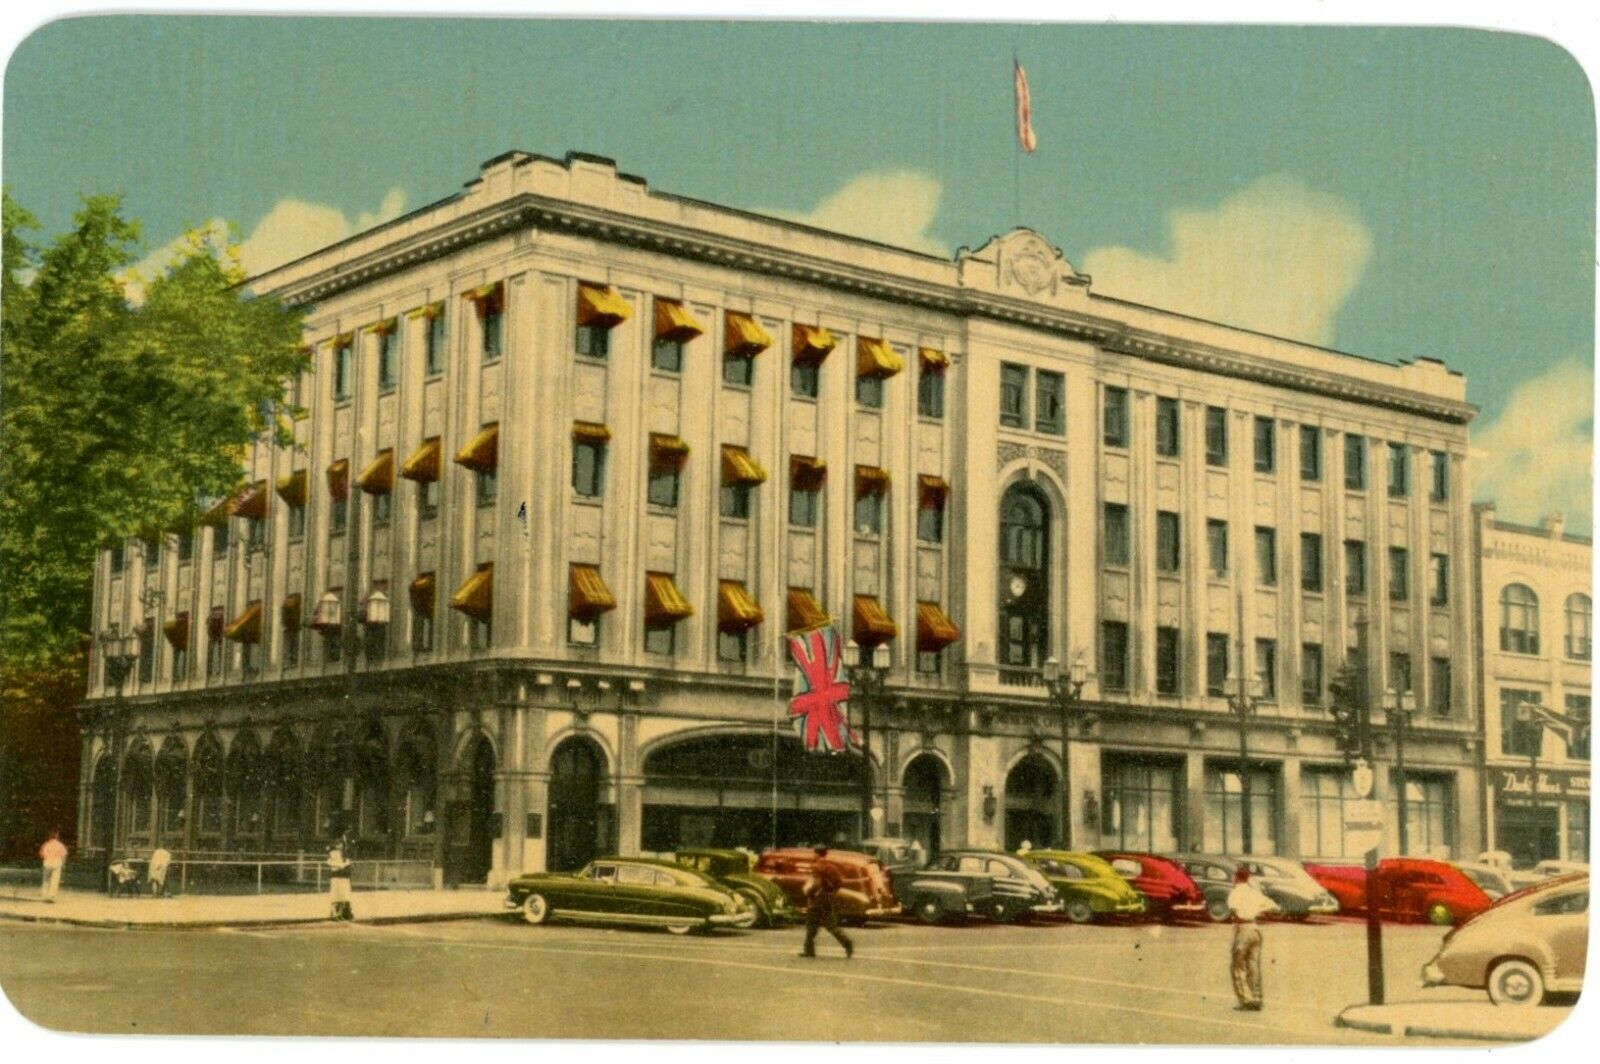 Vintage Cars And People At Municipal Building, London, Ontario, Canada Postcard